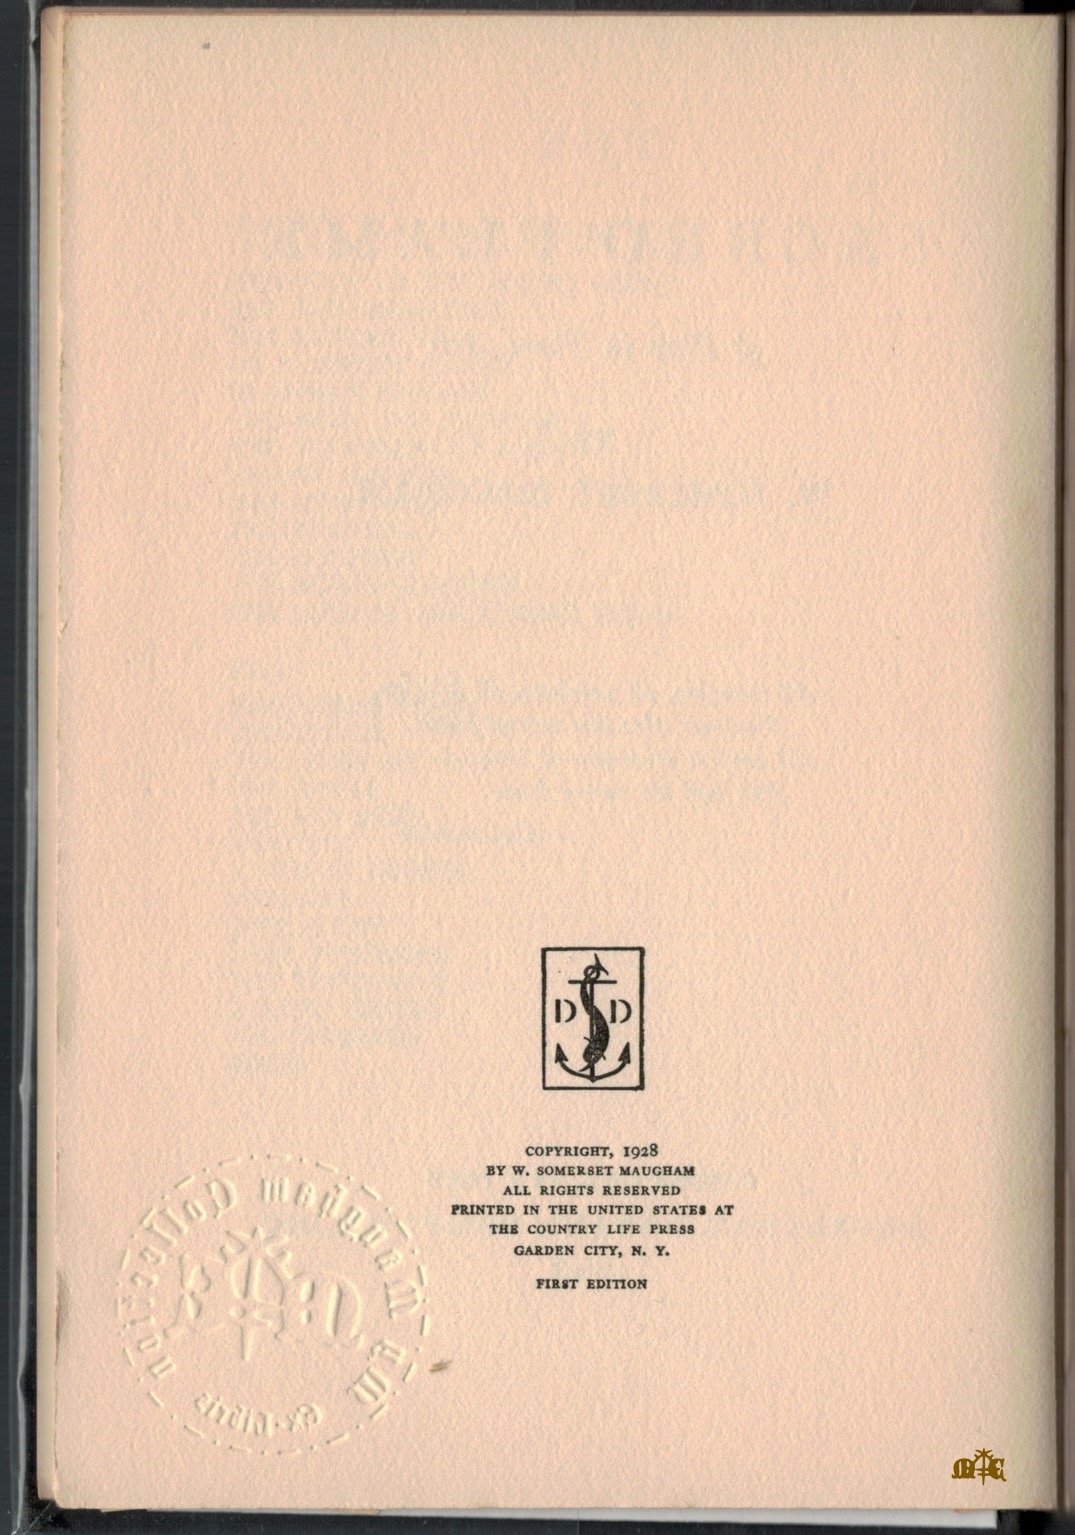 copyright of The Sacred Flame 1928